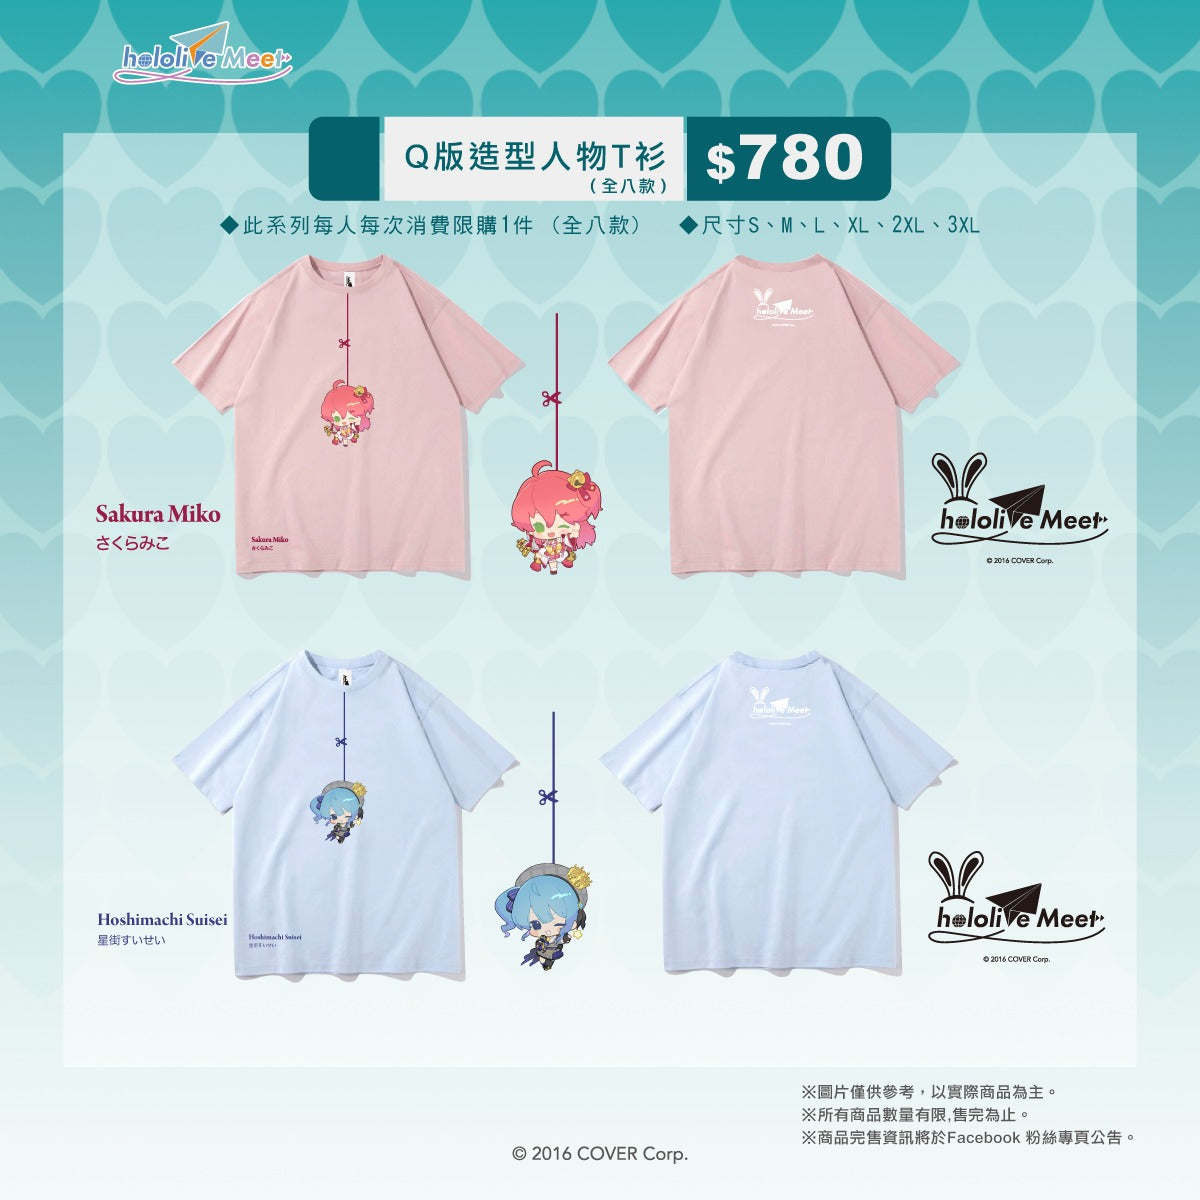  [In-stock] Hololive Meet x Taipei - Qver. T-shirt